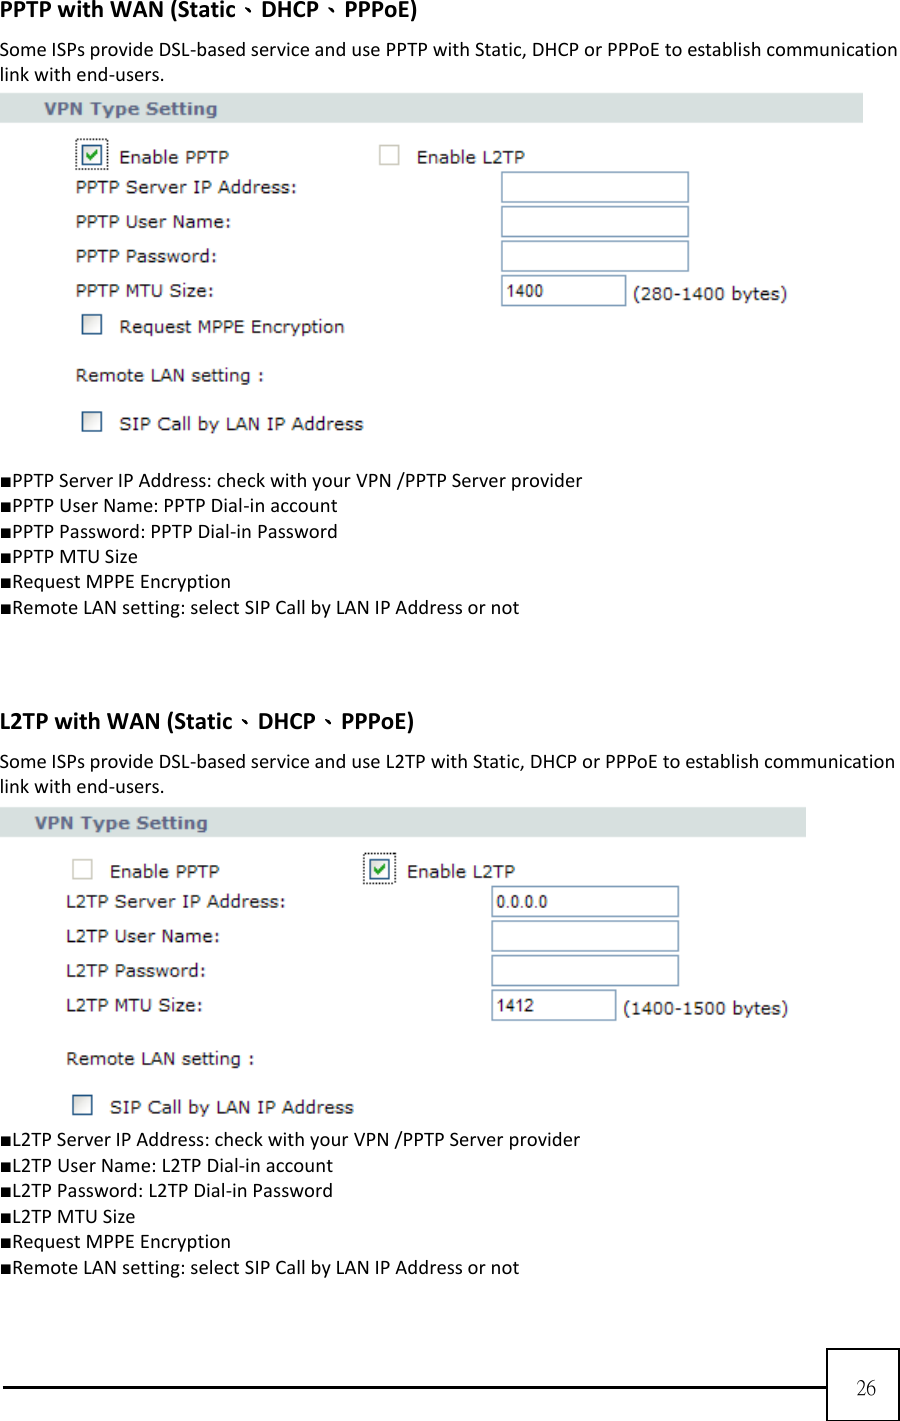  26   PPTP with WAN (Static、DHCP、PPPoE) Some ISPs provide DSL-based service and use PPTP with Static, DHCP or PPPoE to establish communication link with end-users.   ■PPTP Server IP Address: check with your VPN /PPTP Server provider ■PPTP User Name: PPTP Dial-in account   ■PPTP Password: PPTP Dial-in Password ■PPTP MTU Size ■Request MPPE Encryption ■Remote LAN setting: select SIP Call by LAN IP Address or not    L2TP with WAN (Static、DHCP、PPPoE) Some ISPs provide DSL-based service and use L2TP with Static, DHCP or PPPoE to establish communication link with end-users.  ■L2TP Server IP Address: check with your VPN /PPTP Server provider ■L2TP User Name: L2TP Dial-in account   ■L2TP Password: L2TP Dial-in Password ■L2TP MTU Size ■Request MPPE Encryption ■Remote LAN setting: select SIP Call by LAN IP Address or not  